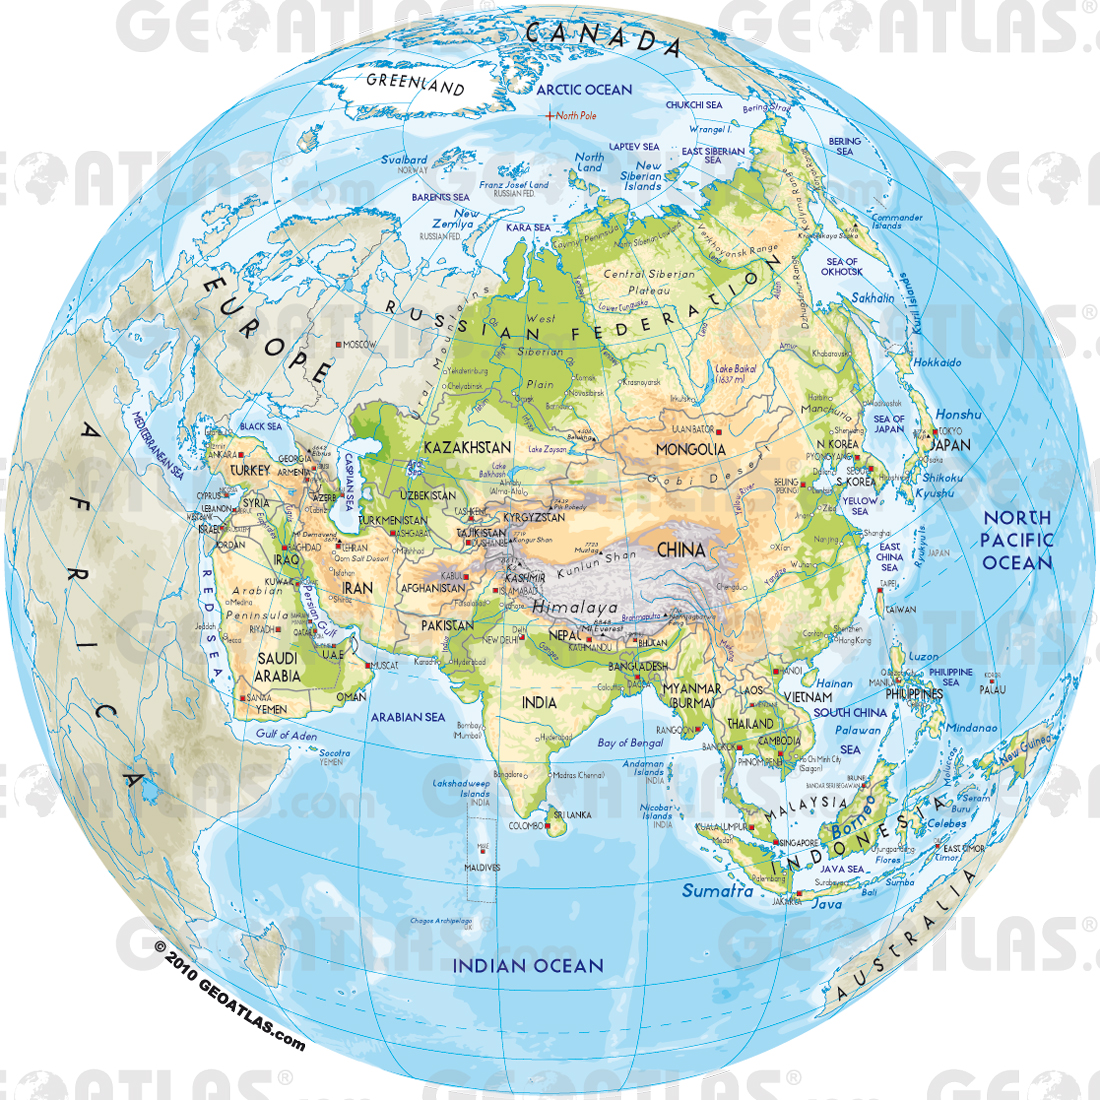 Globe focused on the Asain continent; Image by and retrieved from GEOATLAS.com